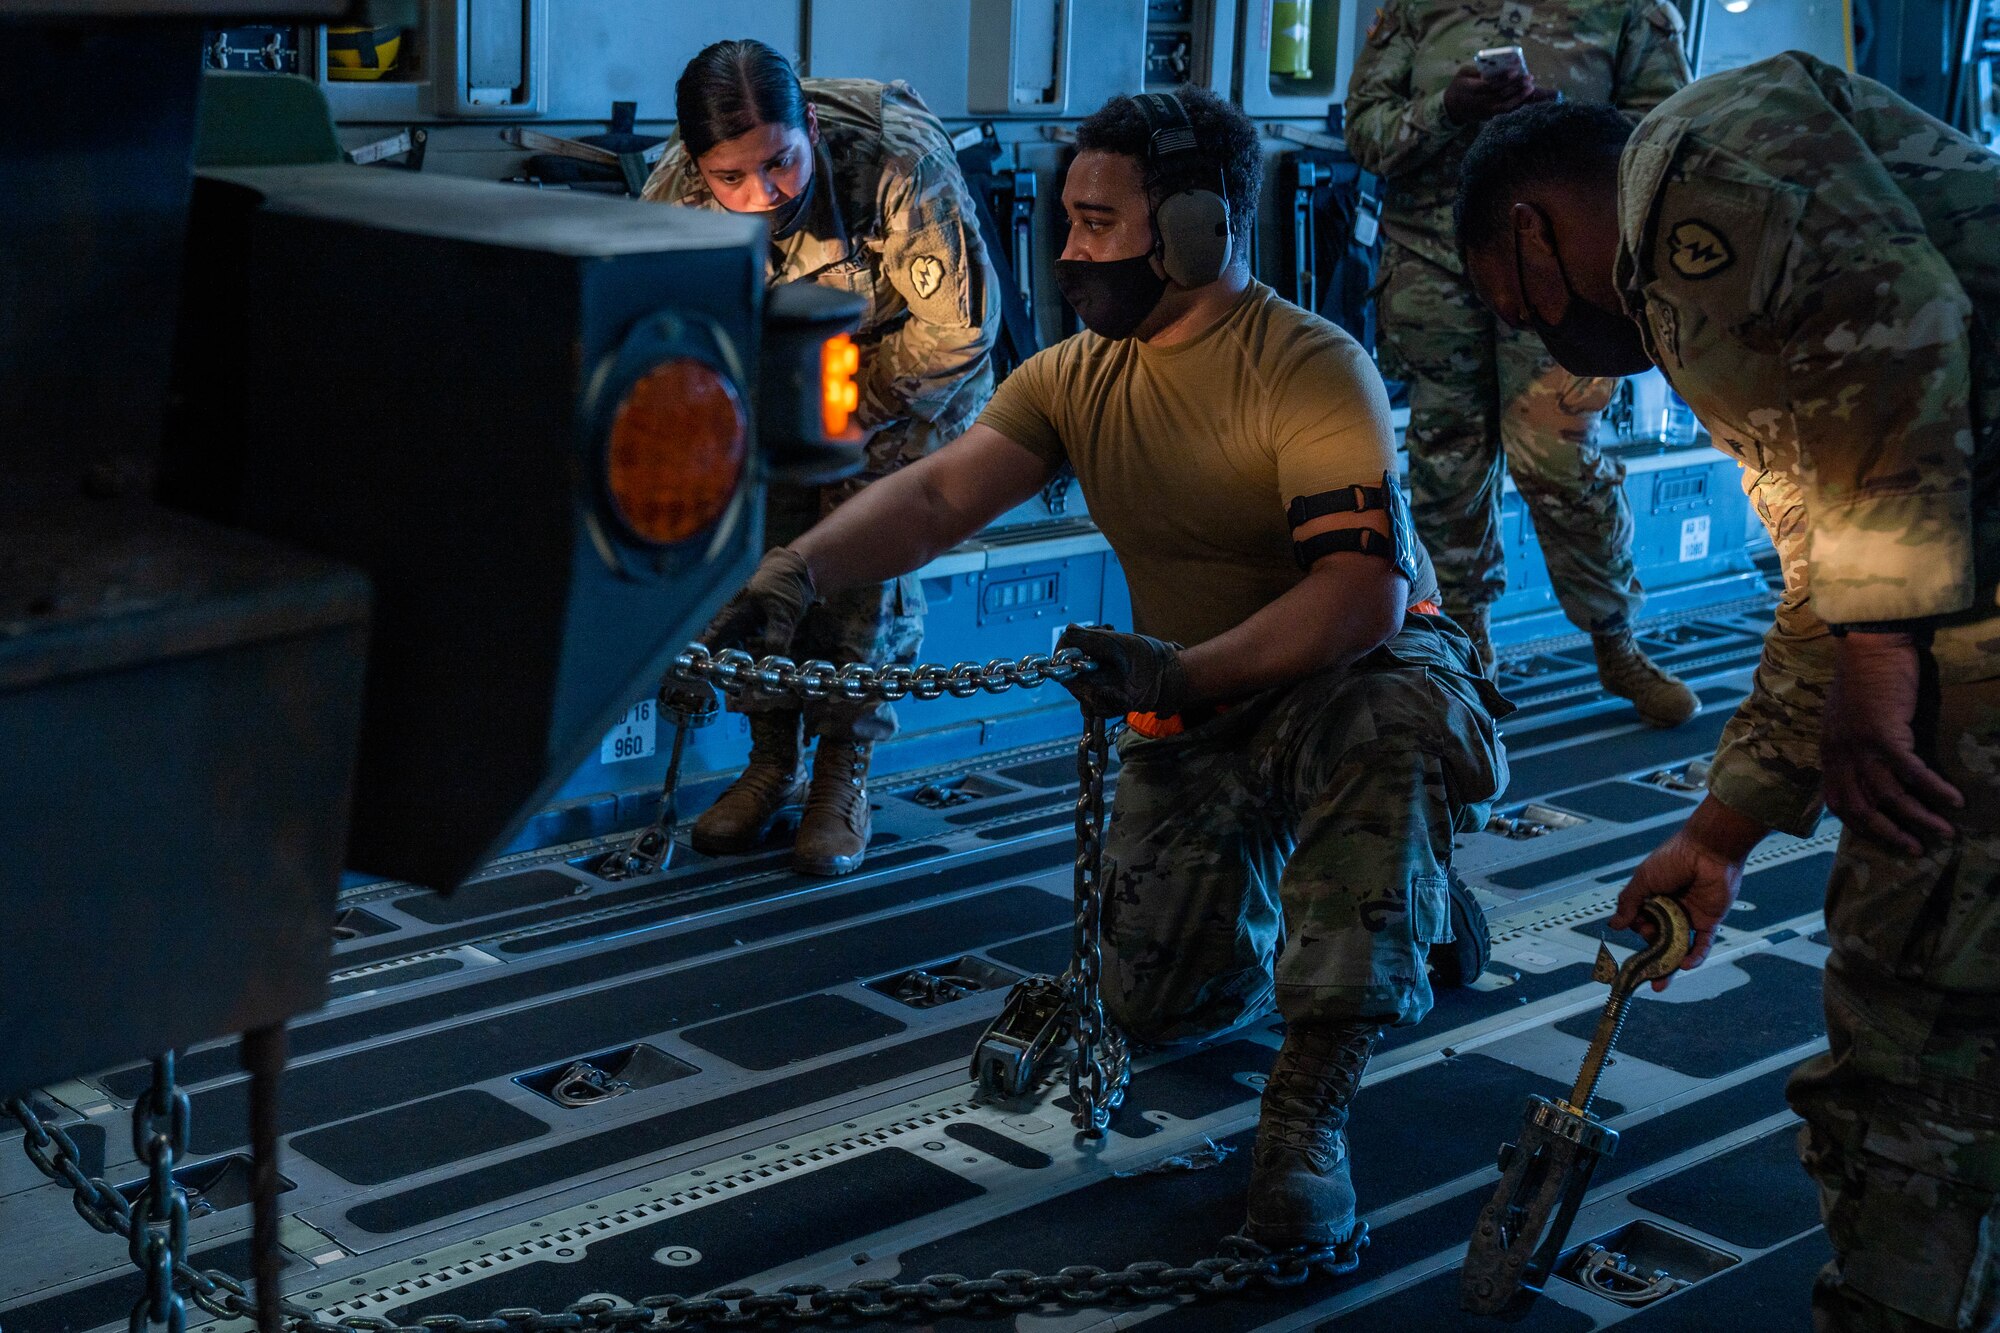 U.S. Air Force Airmen and U.S. Army Soldiers secure a light-medium tactical vehicle on a C-17 Globemaster III during an exercise at Joint Base Pearl Harbor-Hickam, Hawaii, Jan. 10, 2022. Loadmasters are responsible for properly loading and securing cargo and passengers before the flight. (U.S. Air Force photo by Airman 1st Class Makensie Cooper)